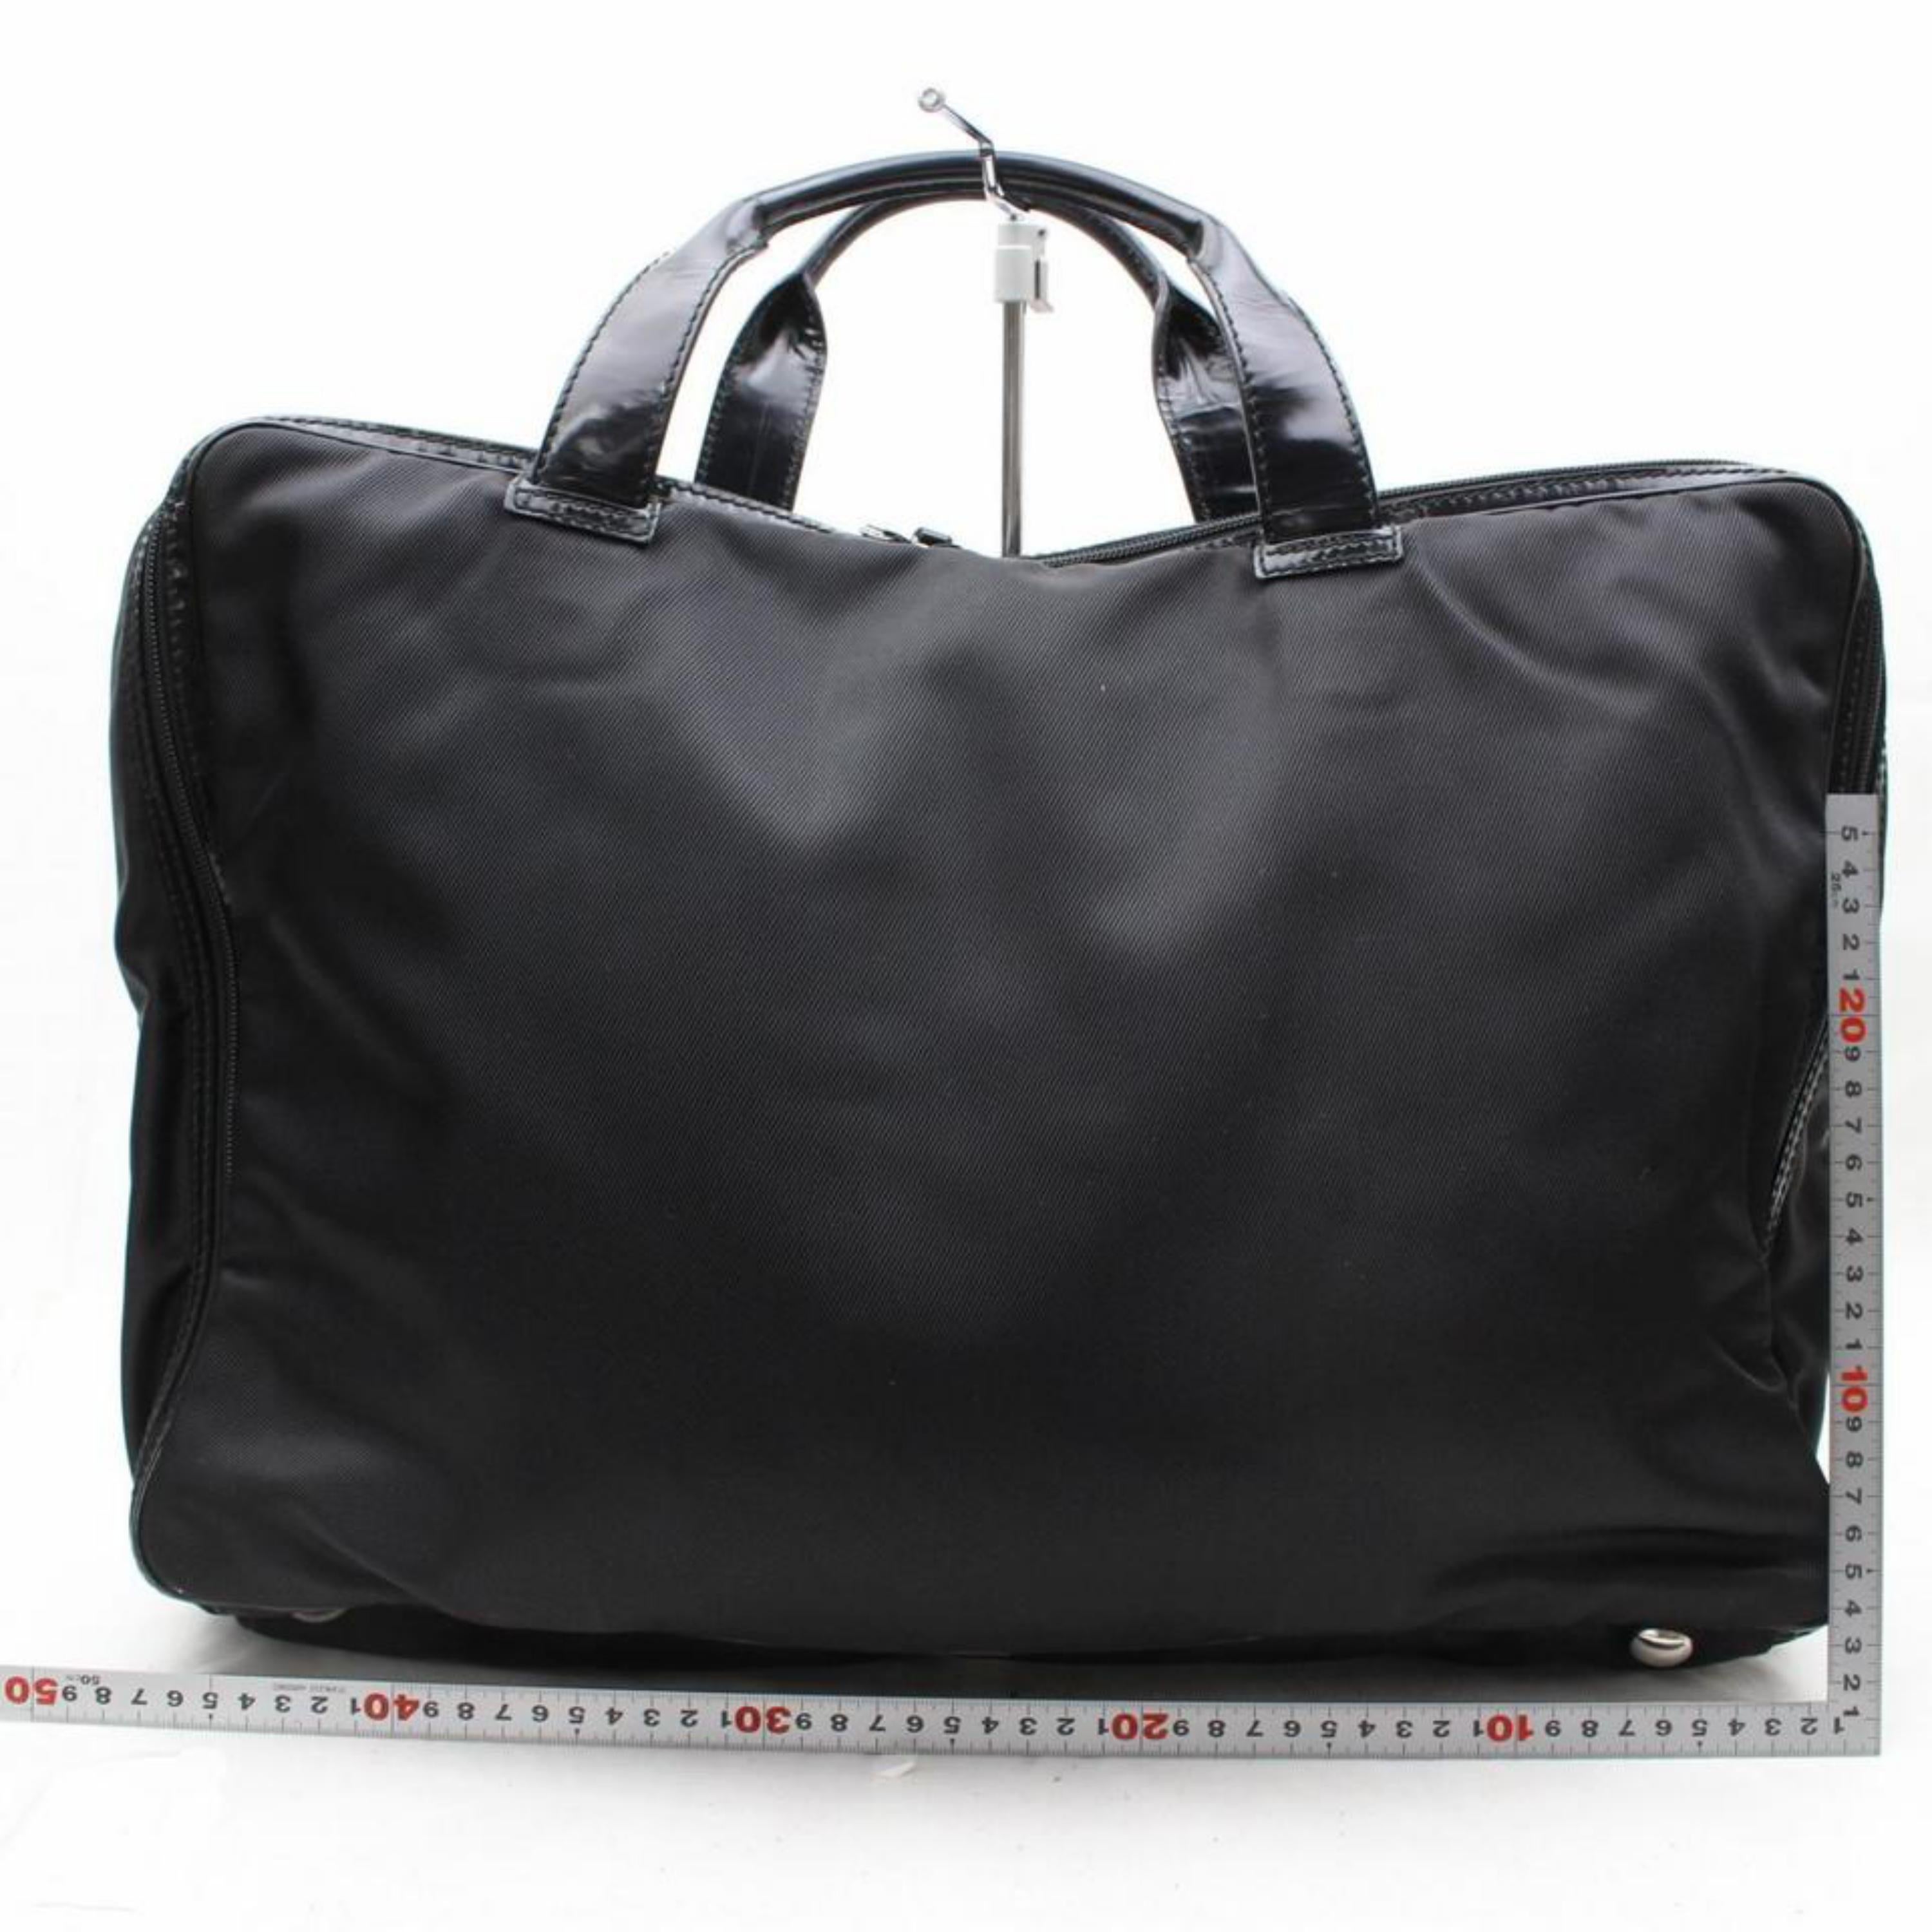 Gucci Rare Suitcase 867675 Black Canvas Weekend/Travel Bag For Sale 1